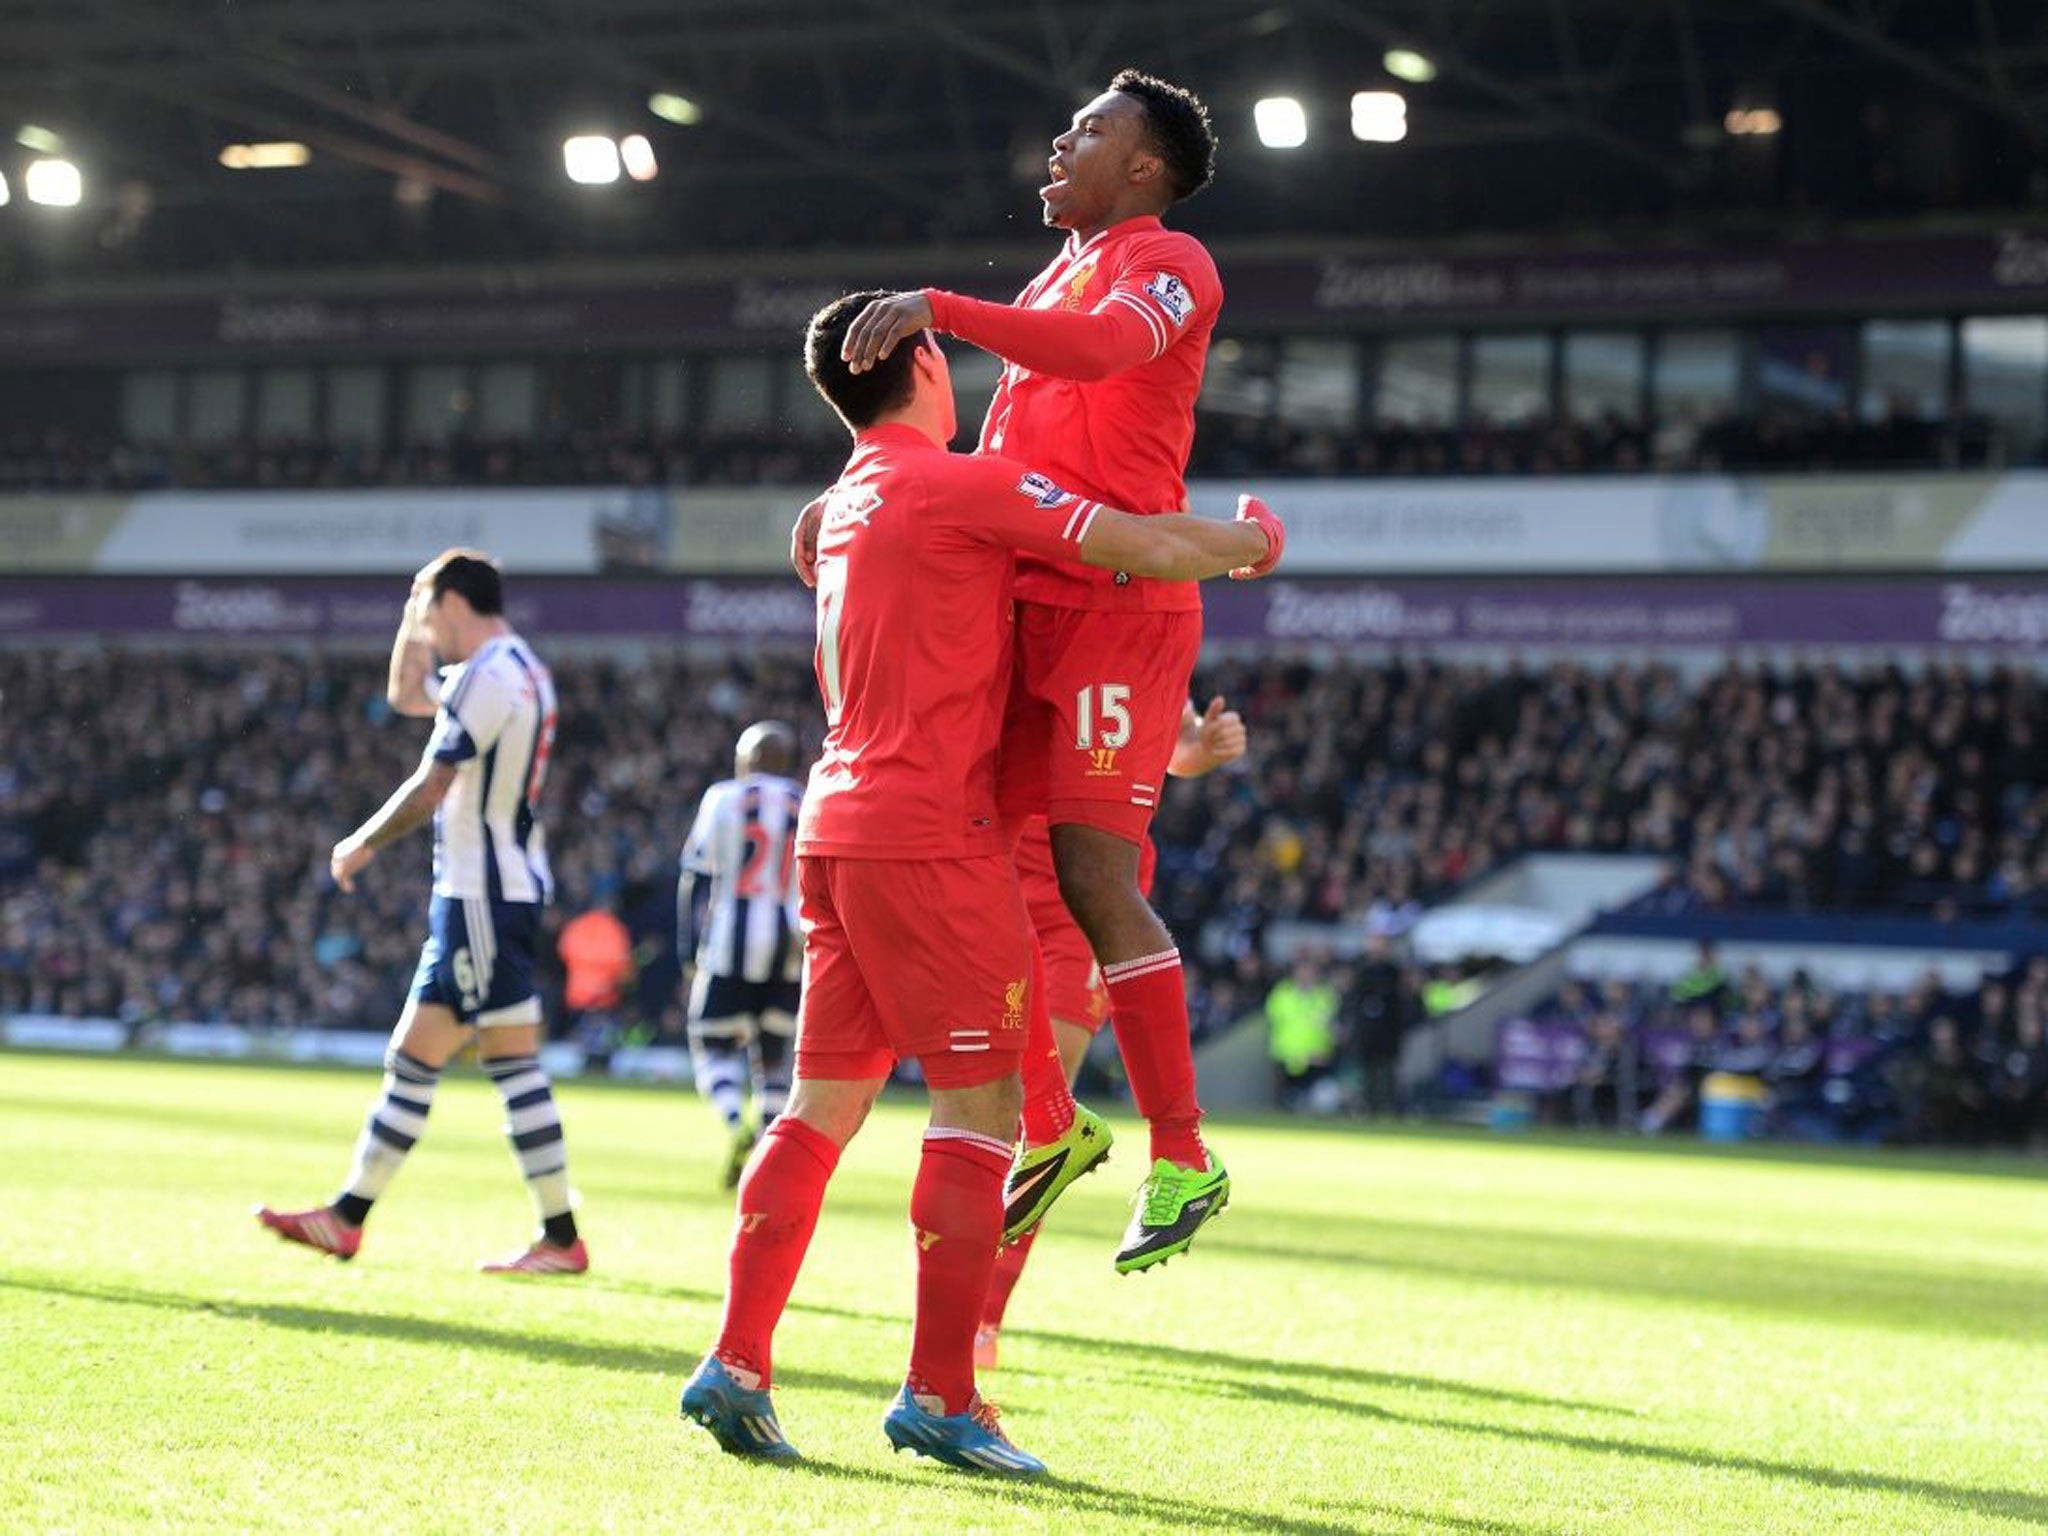 Daniel Sturridge (R) of Liverpool is congratulated by teammate Luis Suarez of Liverpool after scoring the opening goal in a match against West Bromich Albion